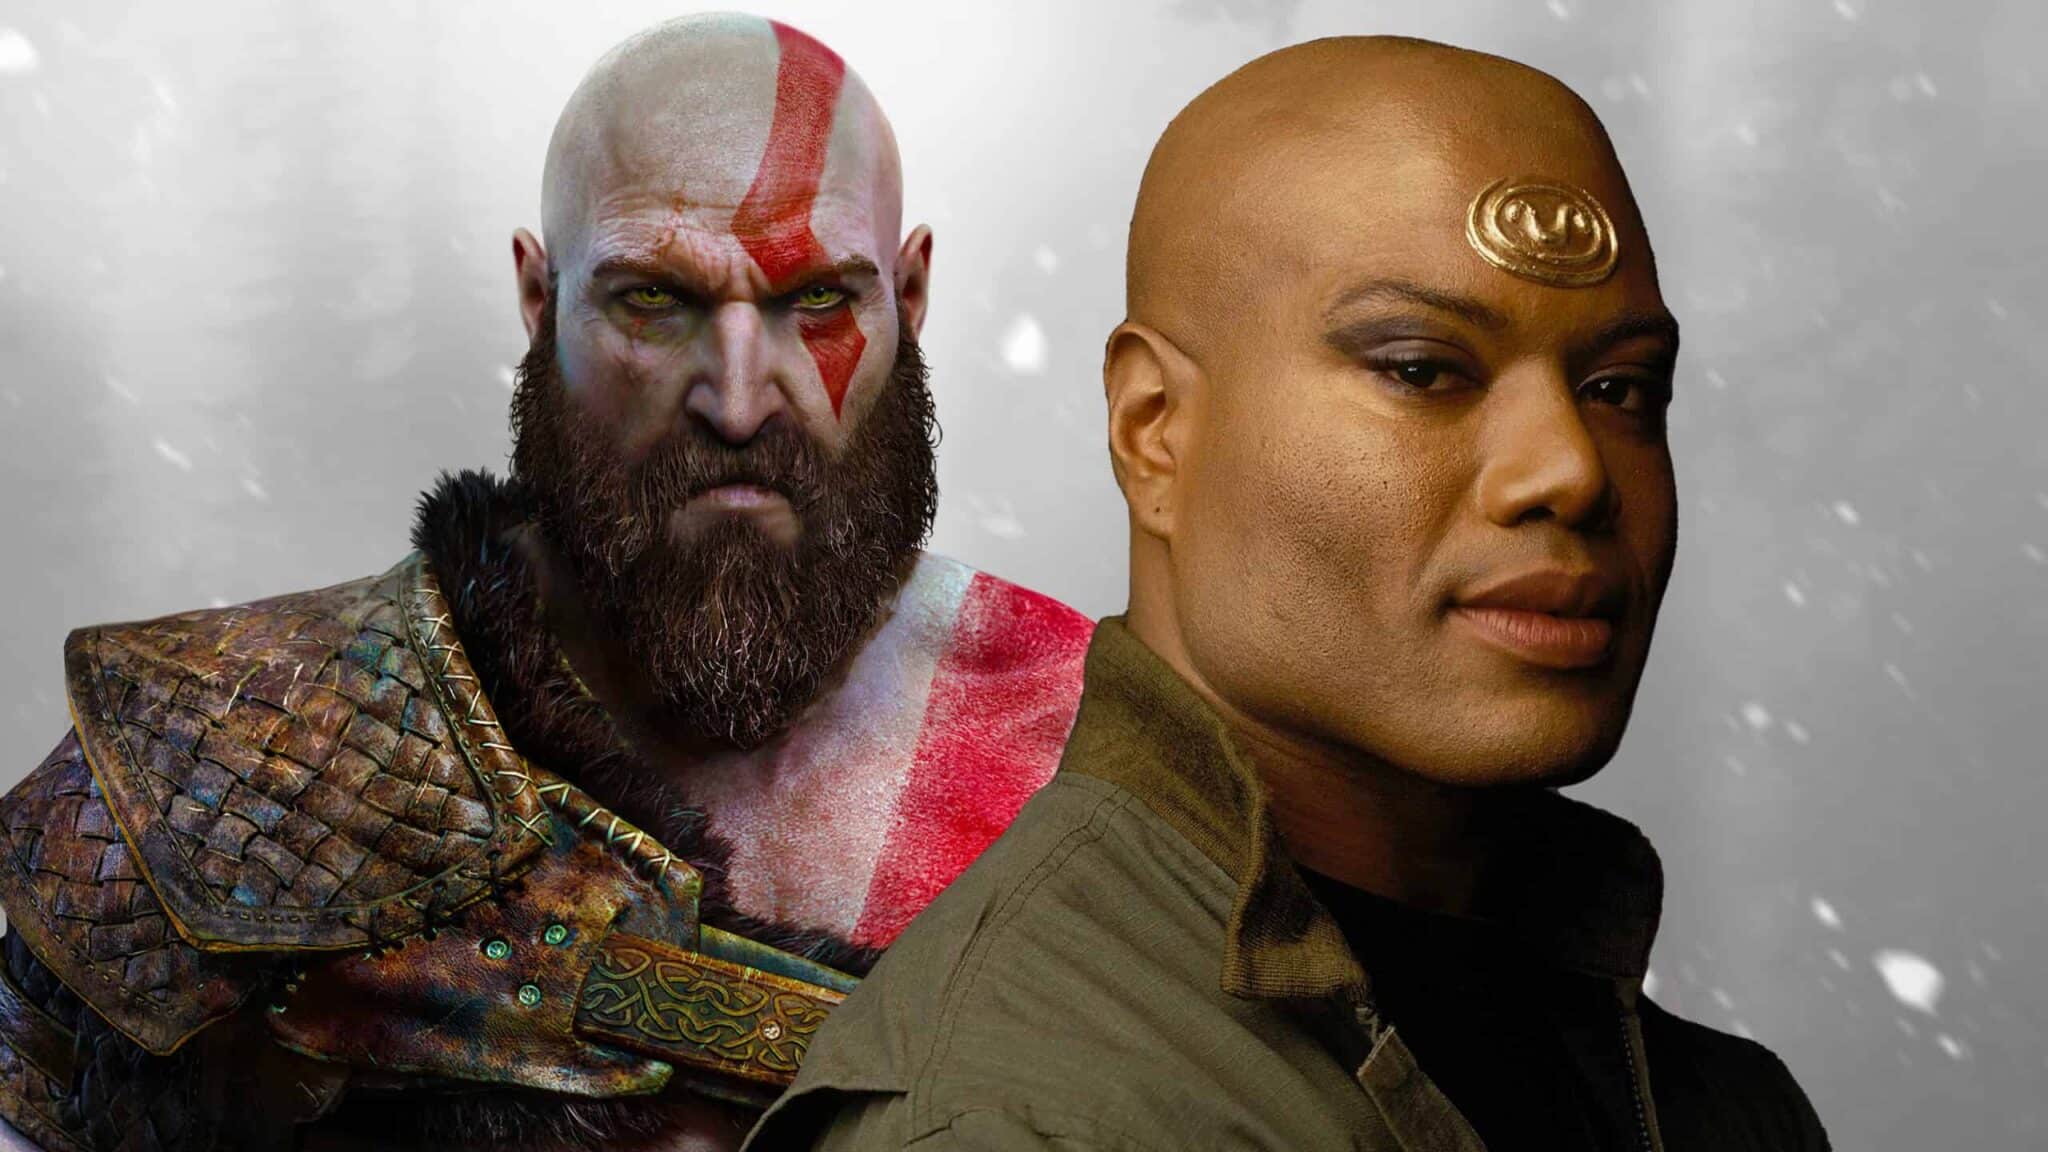 God of War Ragnarok Voice Actor Took the Role Because of His Son